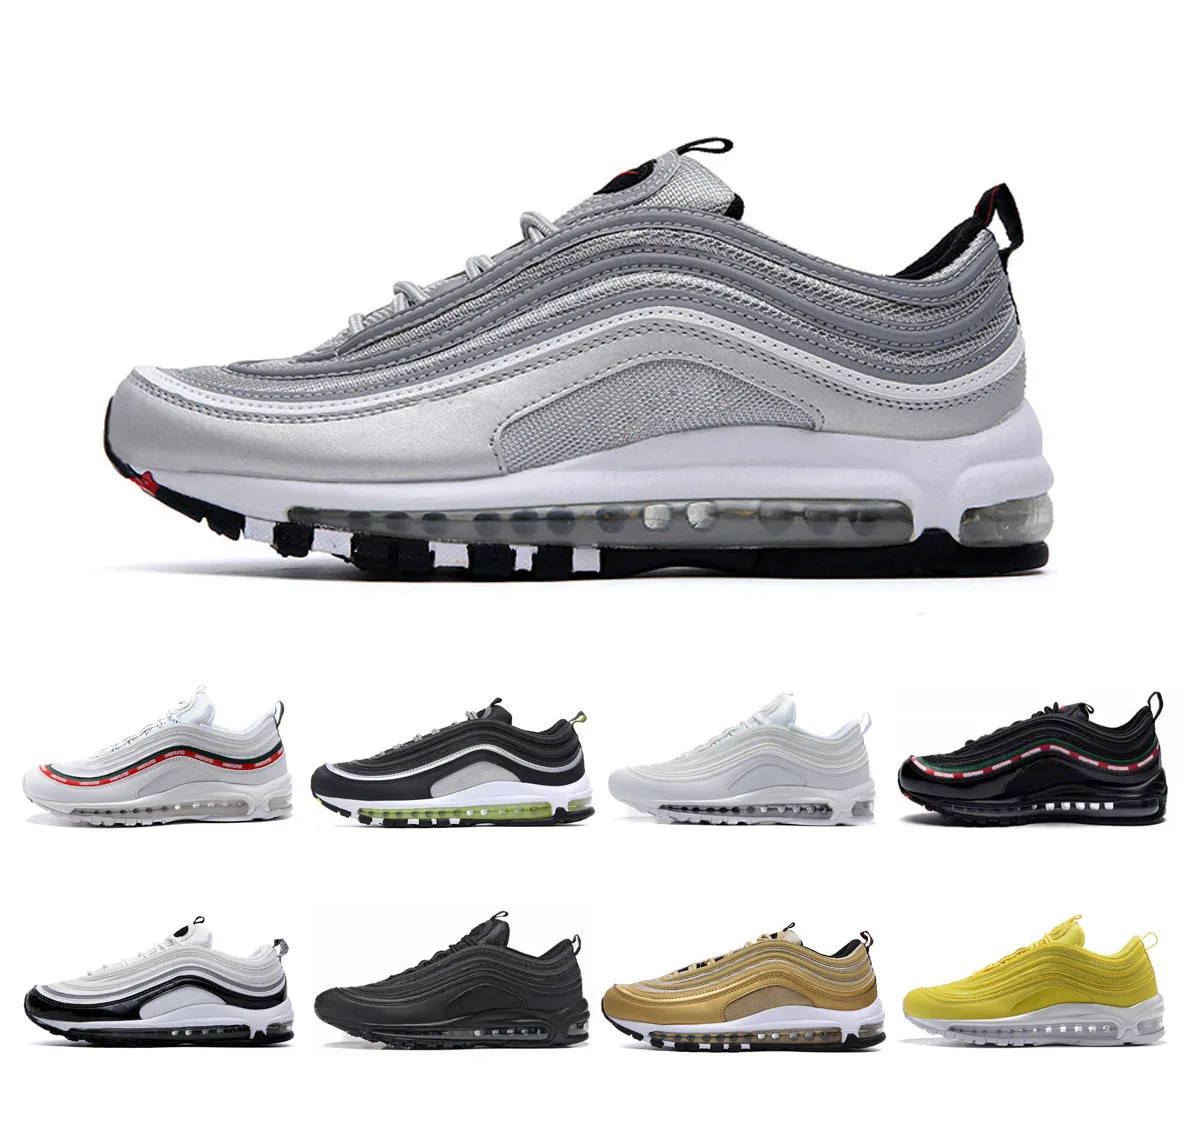 US $58.05 Sbart 2021 New 97 Fulllength Air Cushion Shoes Mens and Womens Sports Shoes Running Shoes